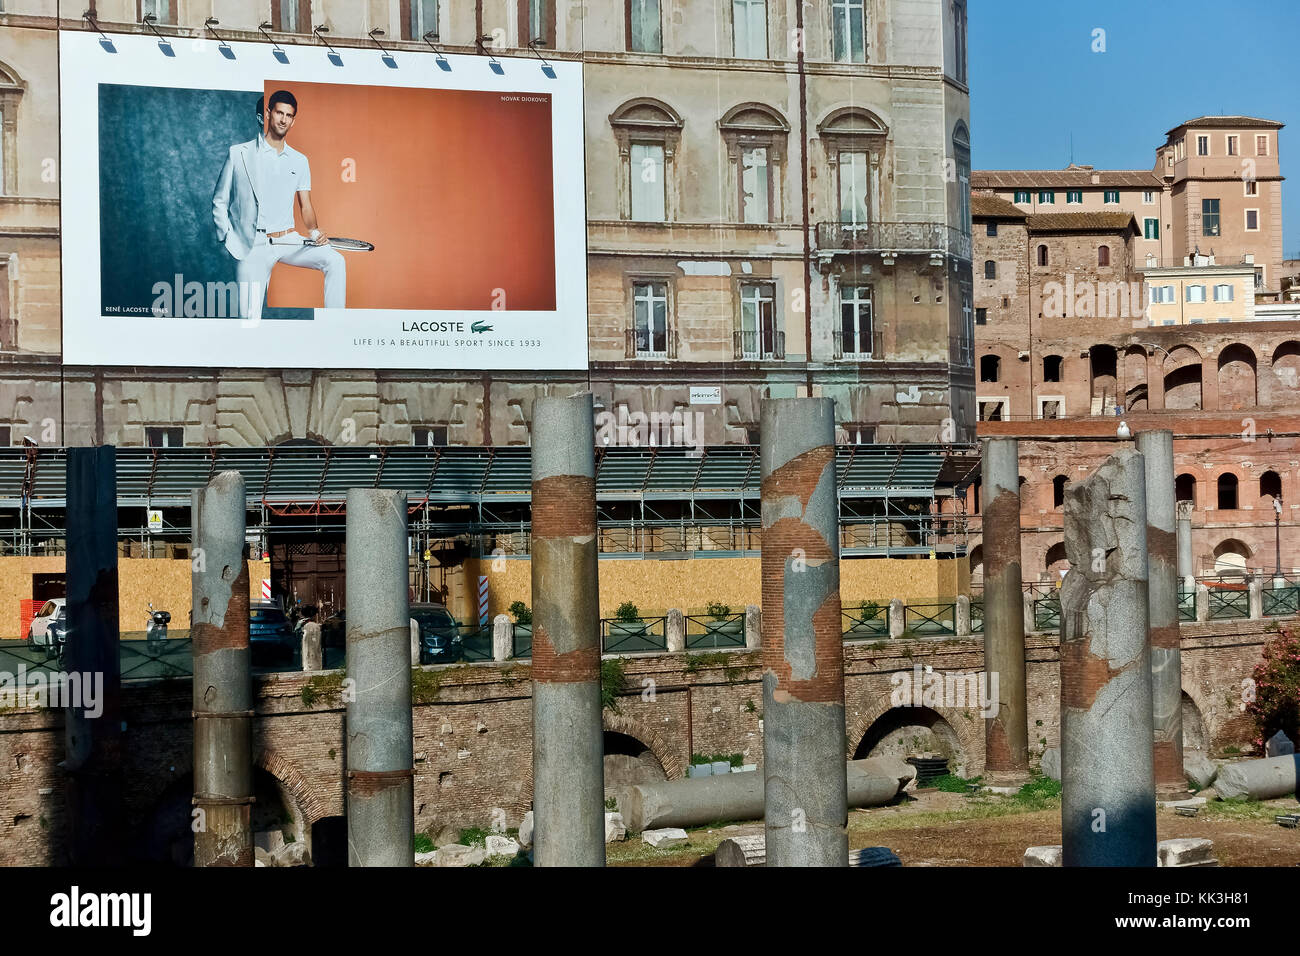 Lacoste advertising billboard on a building scaffolding during restoration  work, at Trajan's Market Forum. Rome, Italy. New and old contrast concept  Stock Photo - Alamy